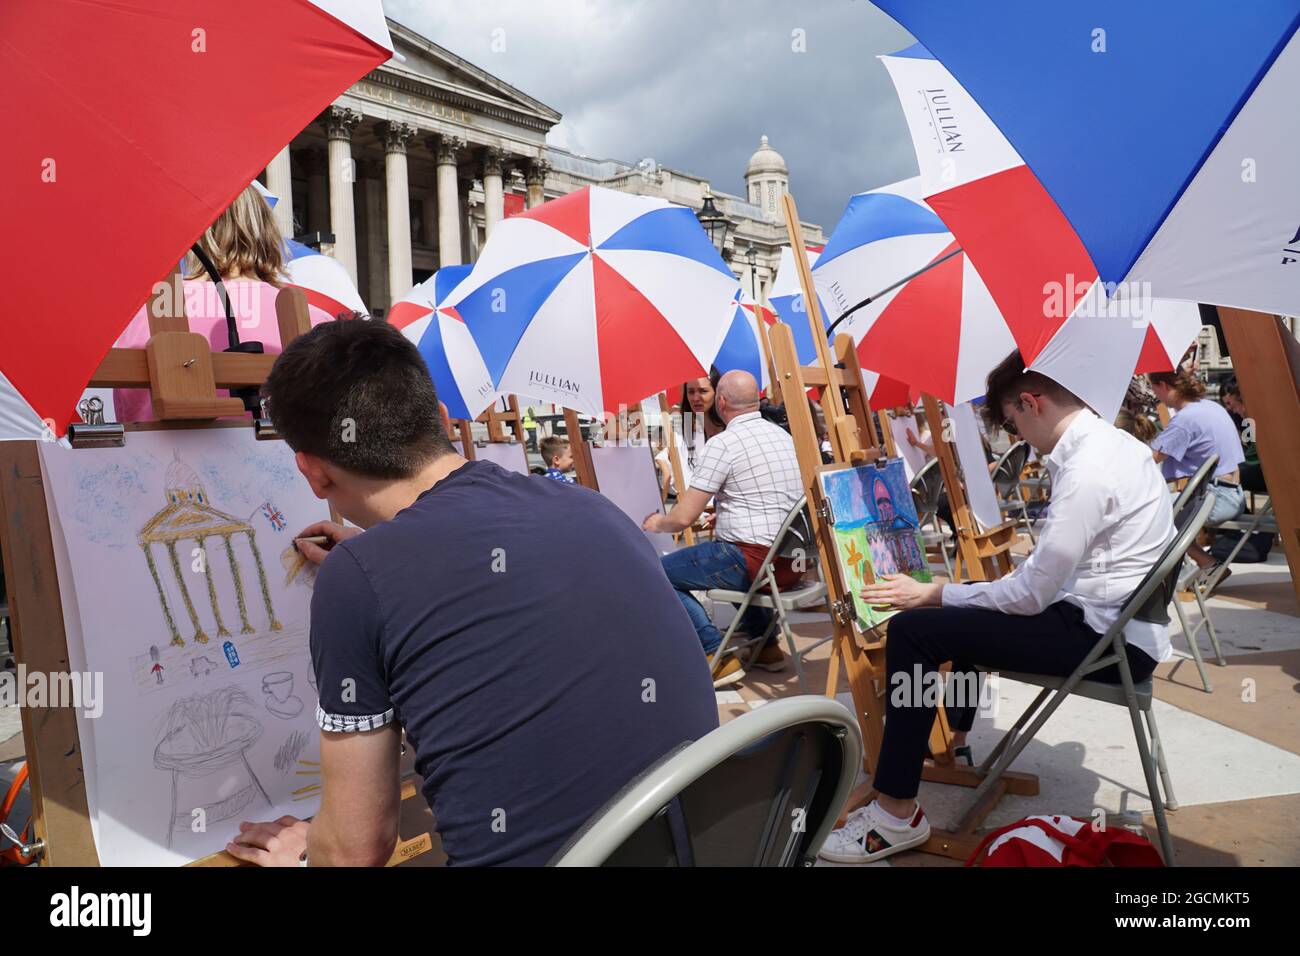 London, UK, 9 August 2021: The National Gallery offers art classes in Trafalgar Square as part of the Inside Out Festival throughout August. Thirty easels have been set up -- with umbrellas for the erratic summer weather -- and people of all ages can drop in to Sketch on the Square for guidance in drawing skills. Anna Watson/Alamy Live News Stock Photo